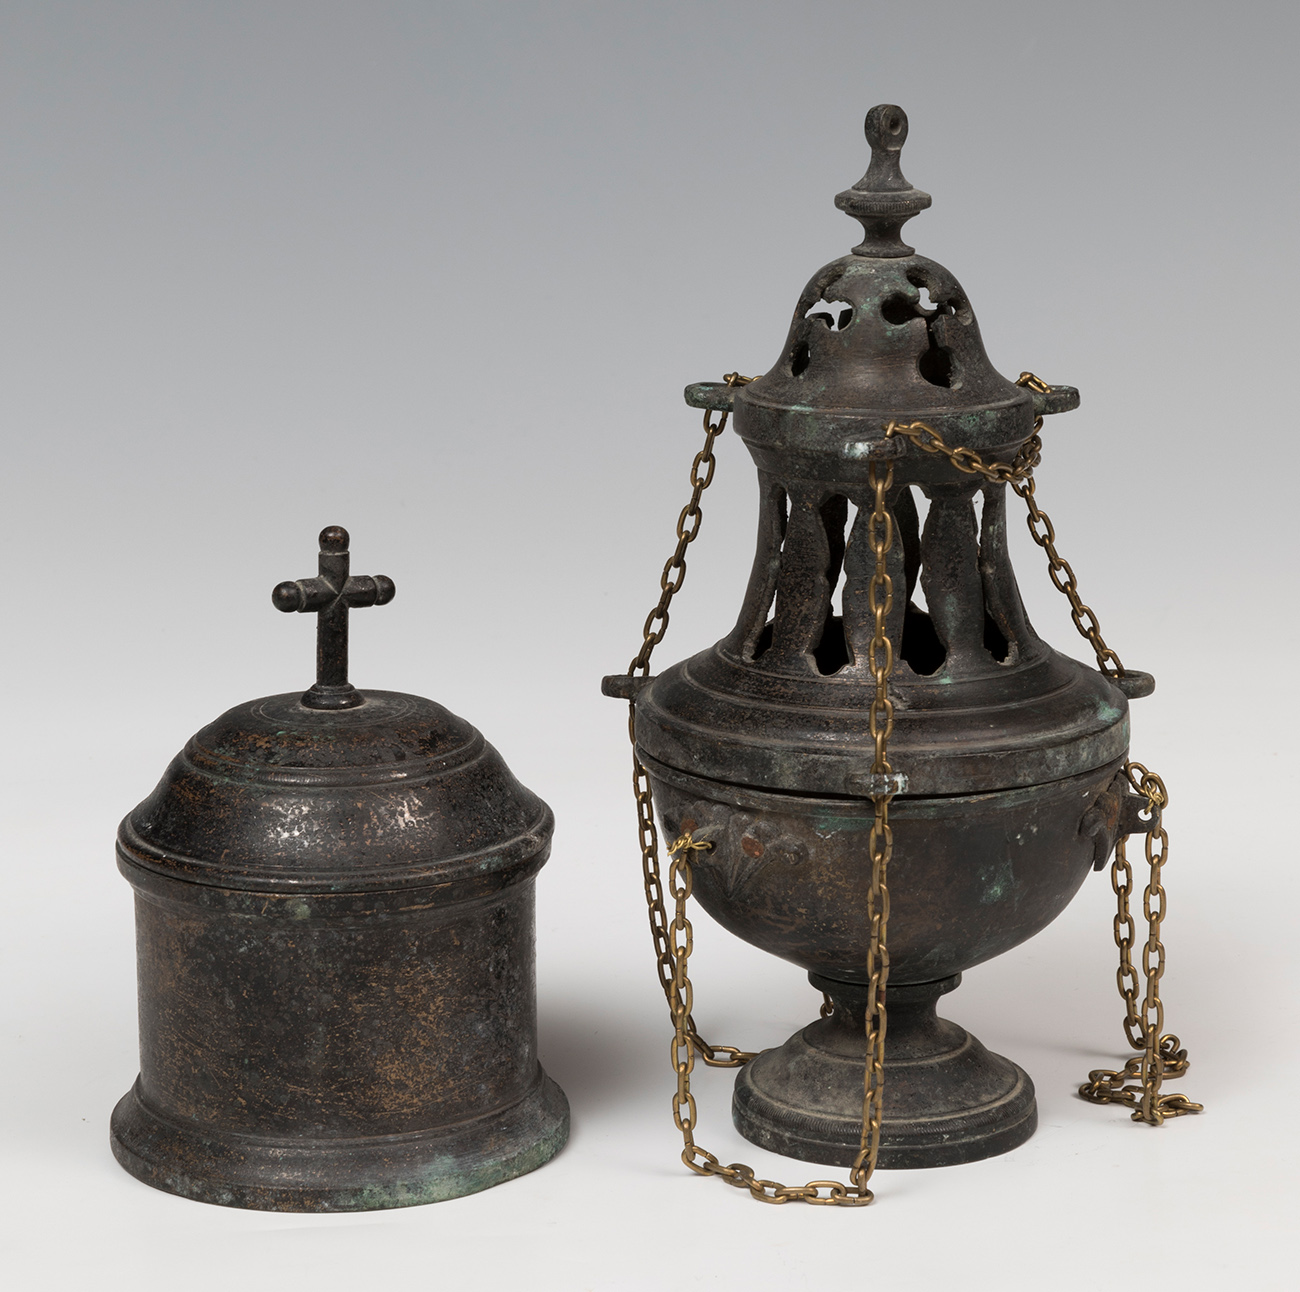 Pyxe and censer. Spain, 17th century.Patinated pewter.Measurements: 22 x 14 cm. censer; 15 x 10 x 10 - Image 3 of 4